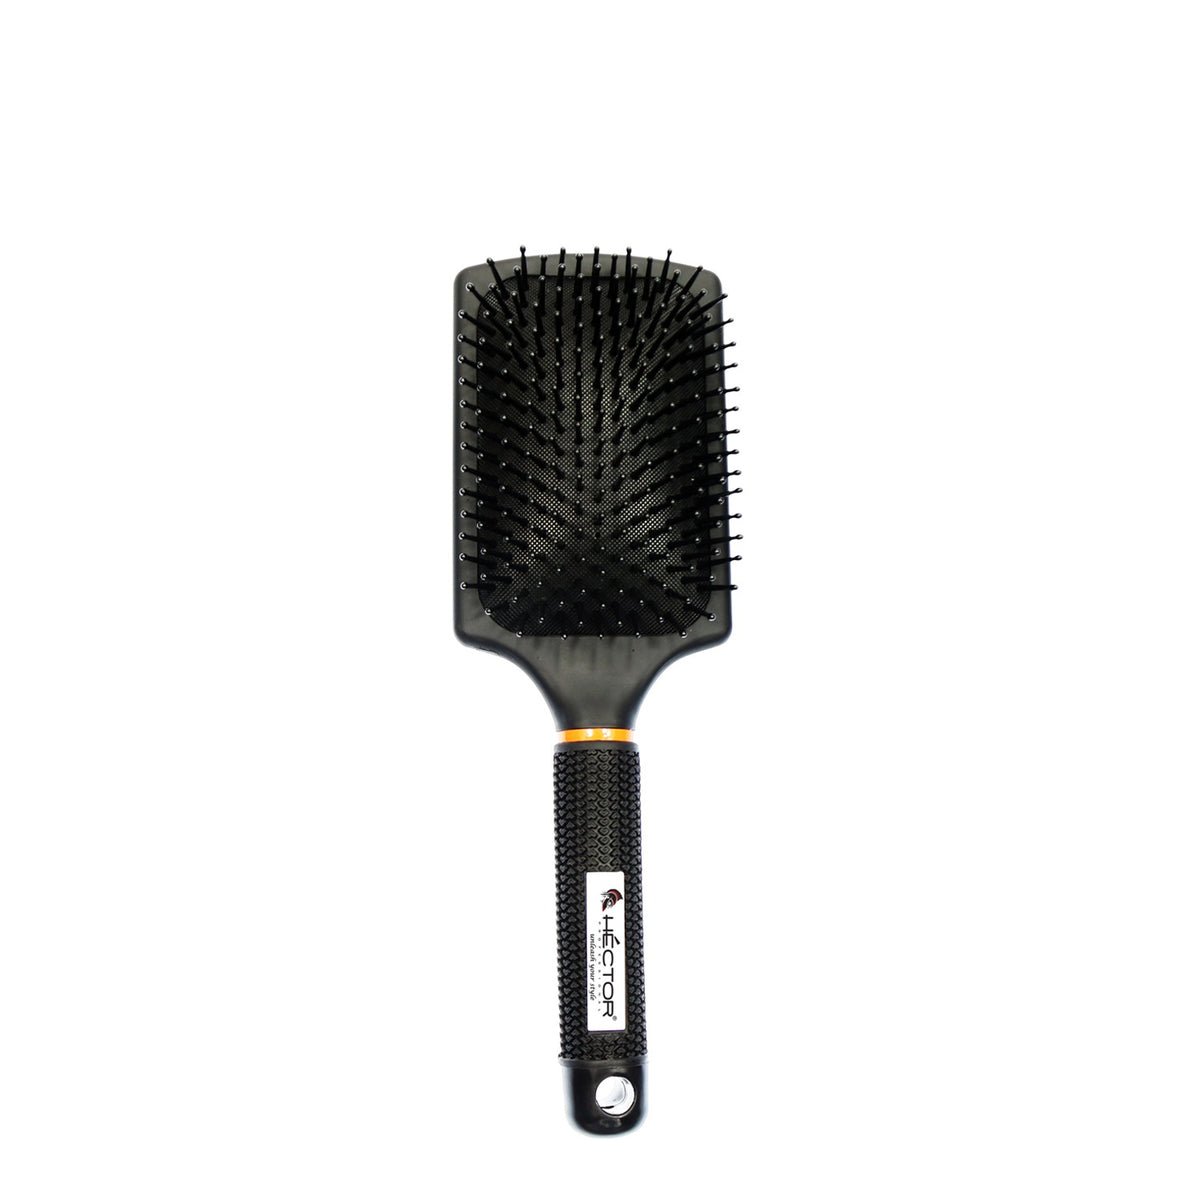 Hector Professional Paddle Brush for Salon/Home use